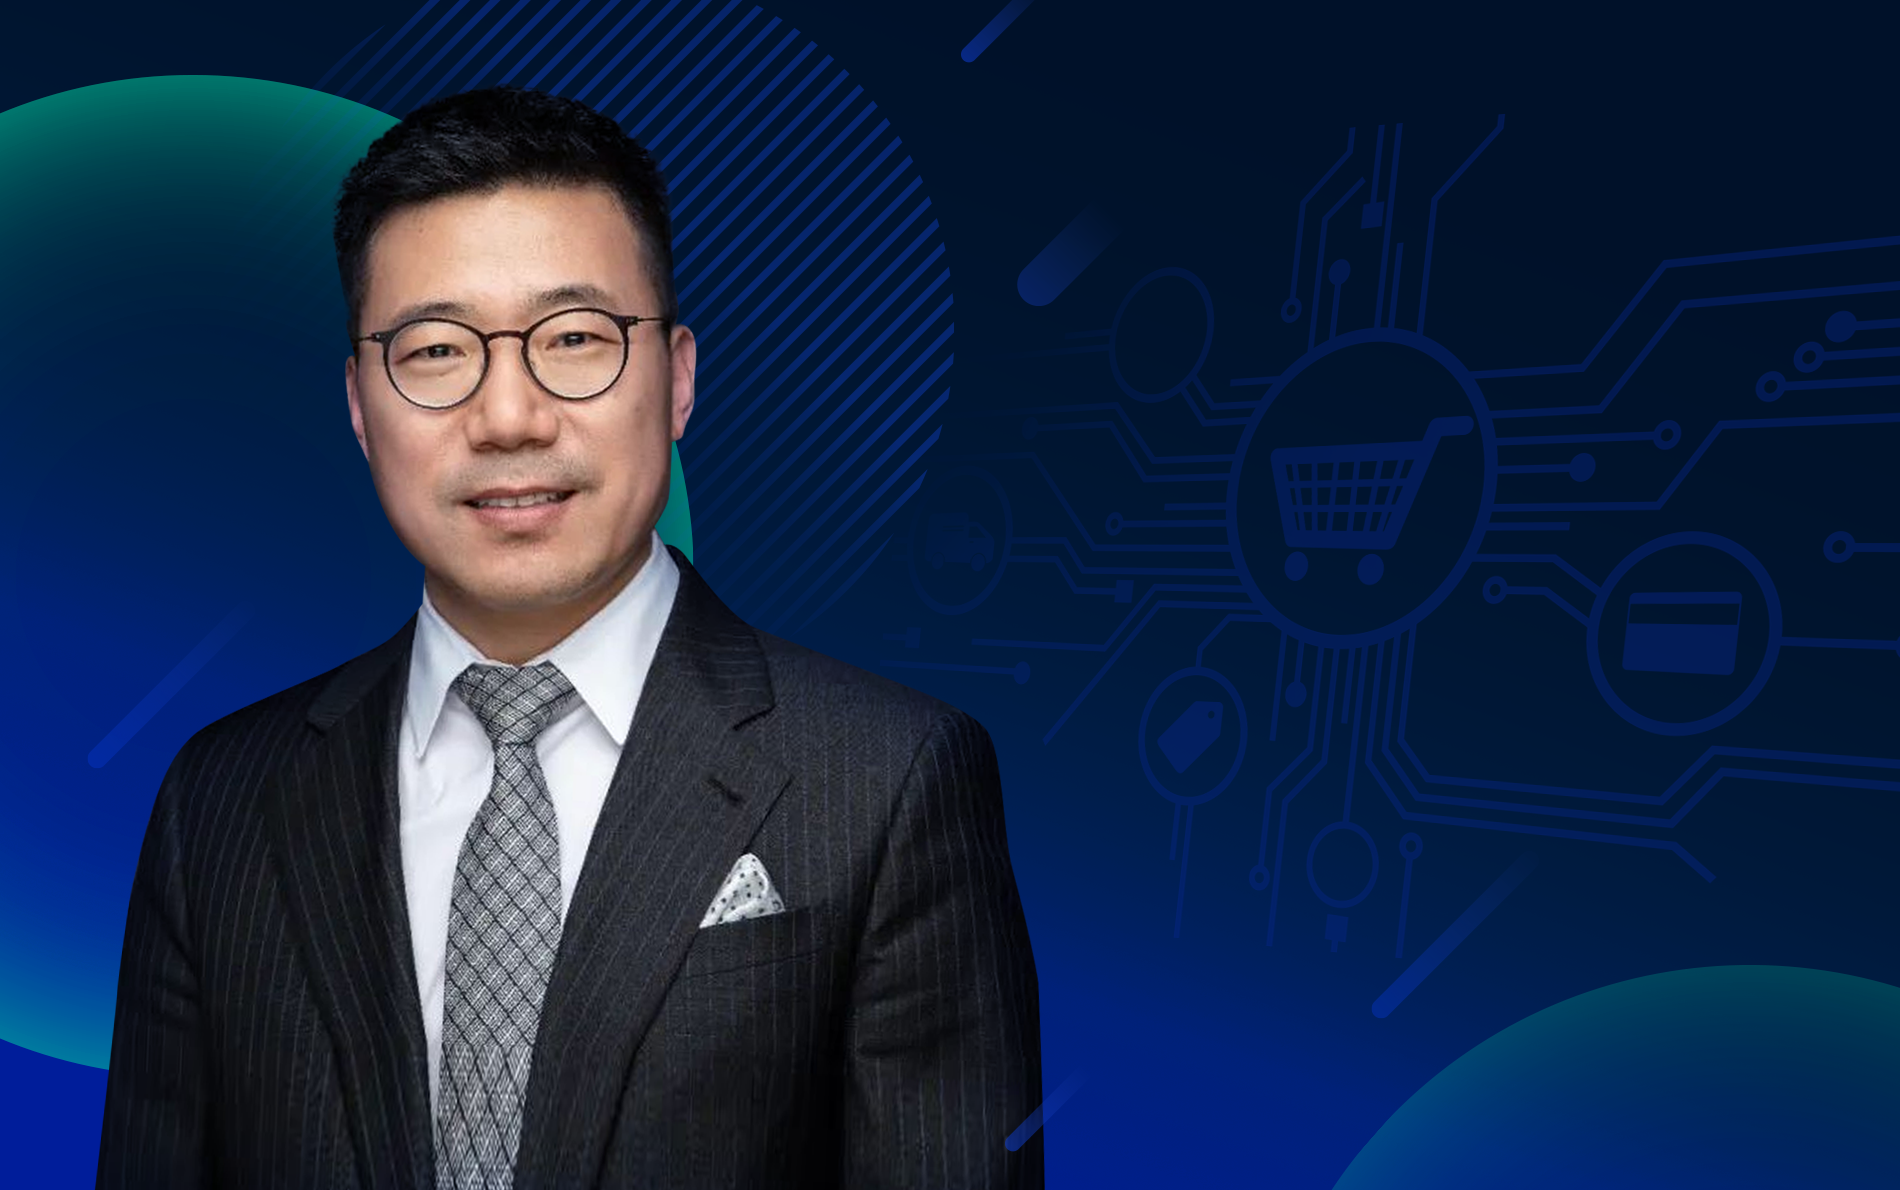 Becoming Extraordinary While Staying Connected in the eCommerce Industry is Baozun's Long-Term Focus: Interview with Vincent Qiu, CEO of Baozun Inc